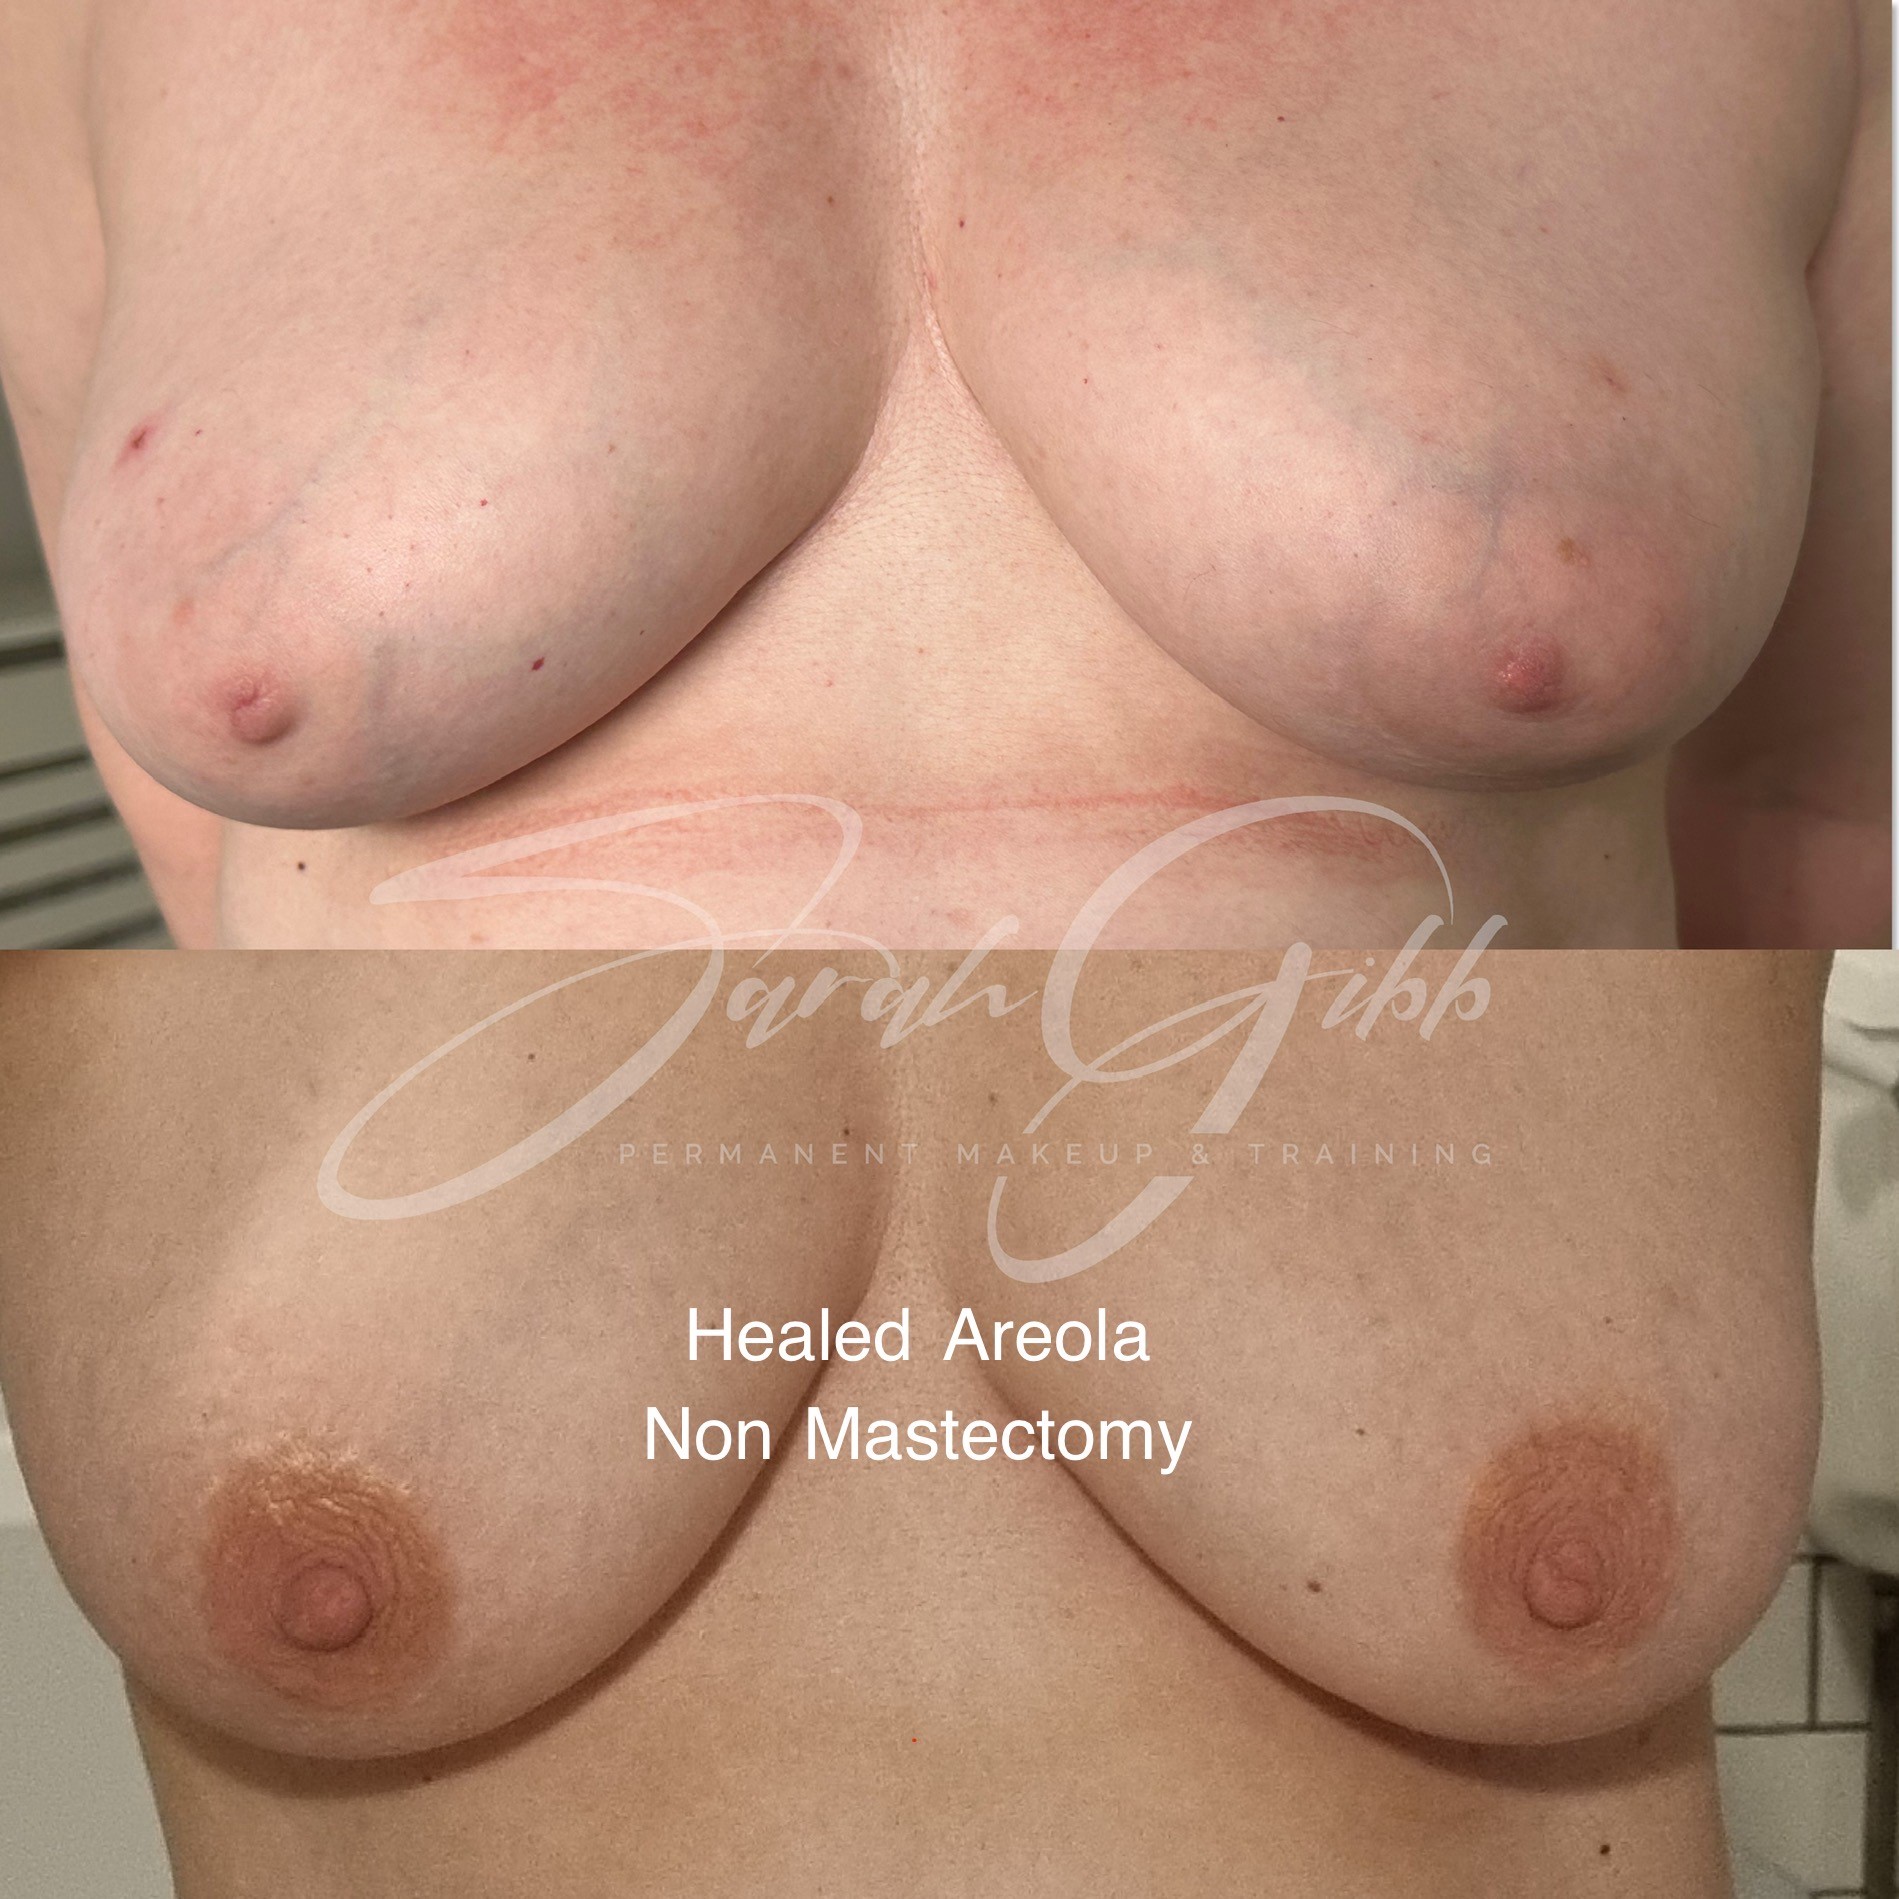 Healed Areola with added colour, non mastectomy. Done by Sarah Gibb UK